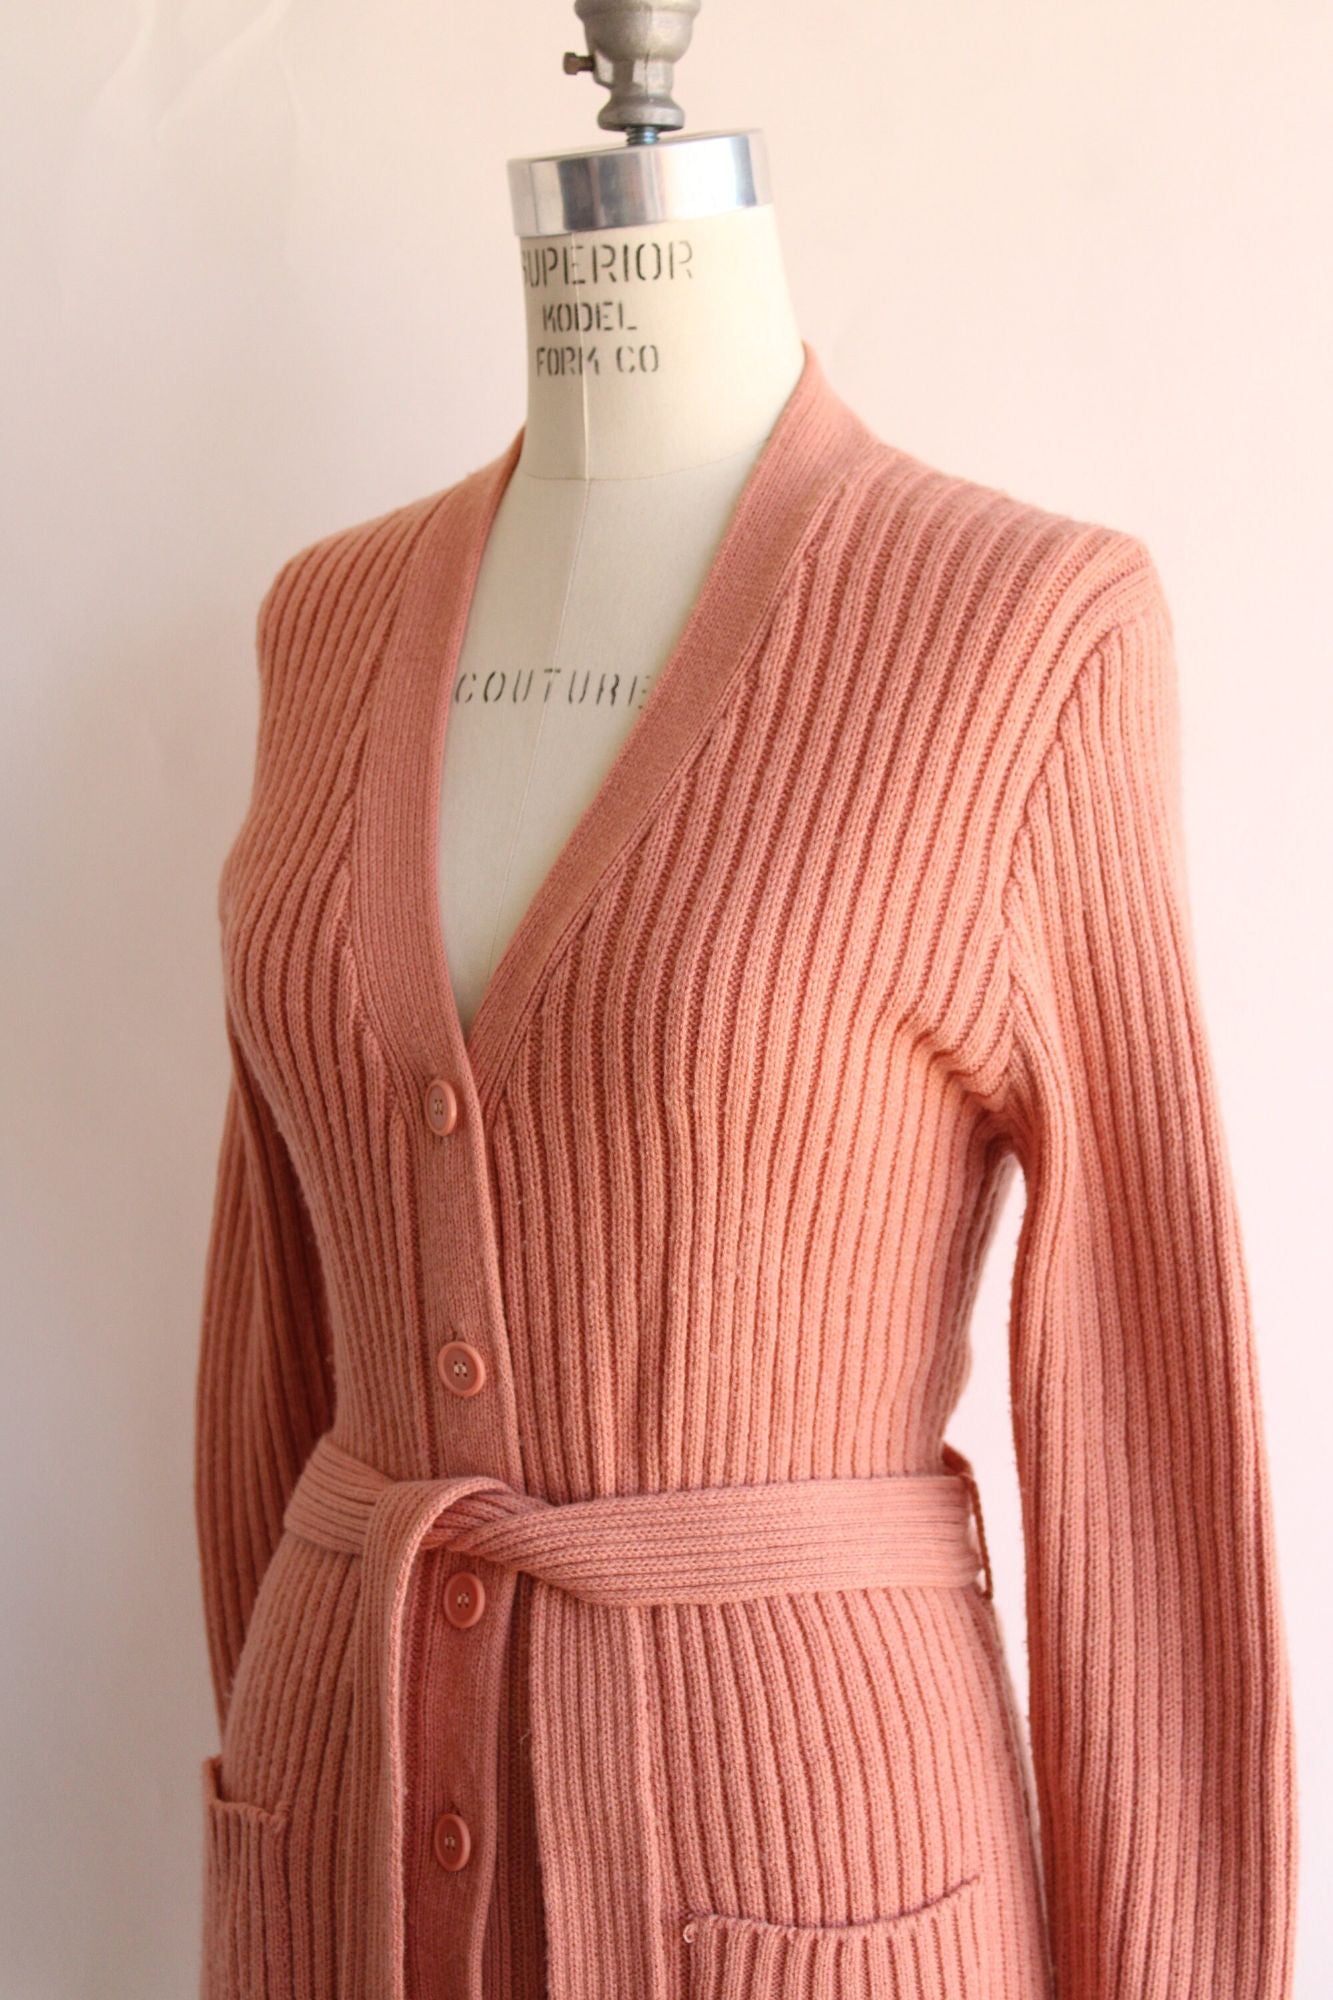 Vintage 1970s 1980s Sweater With Belt and Pockets